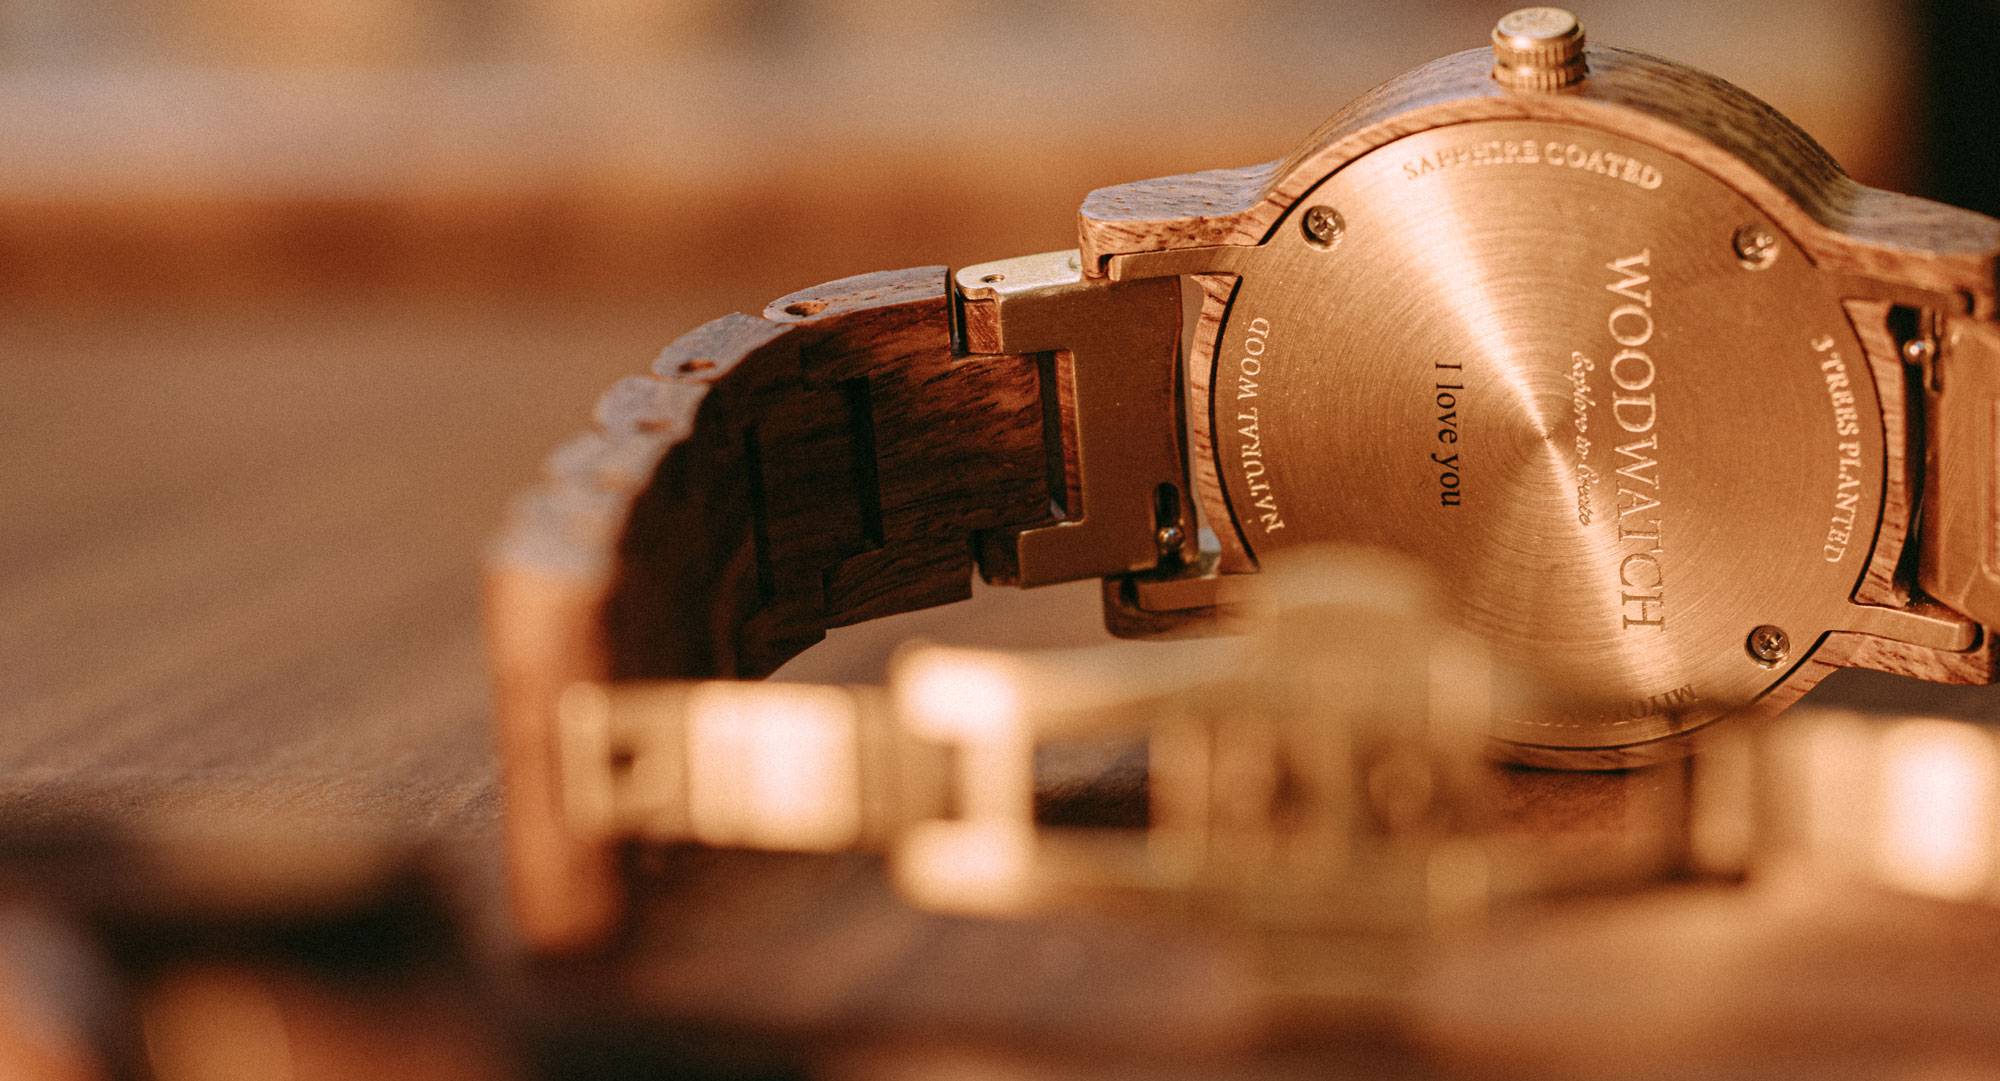 Personalize Your WoodWatch